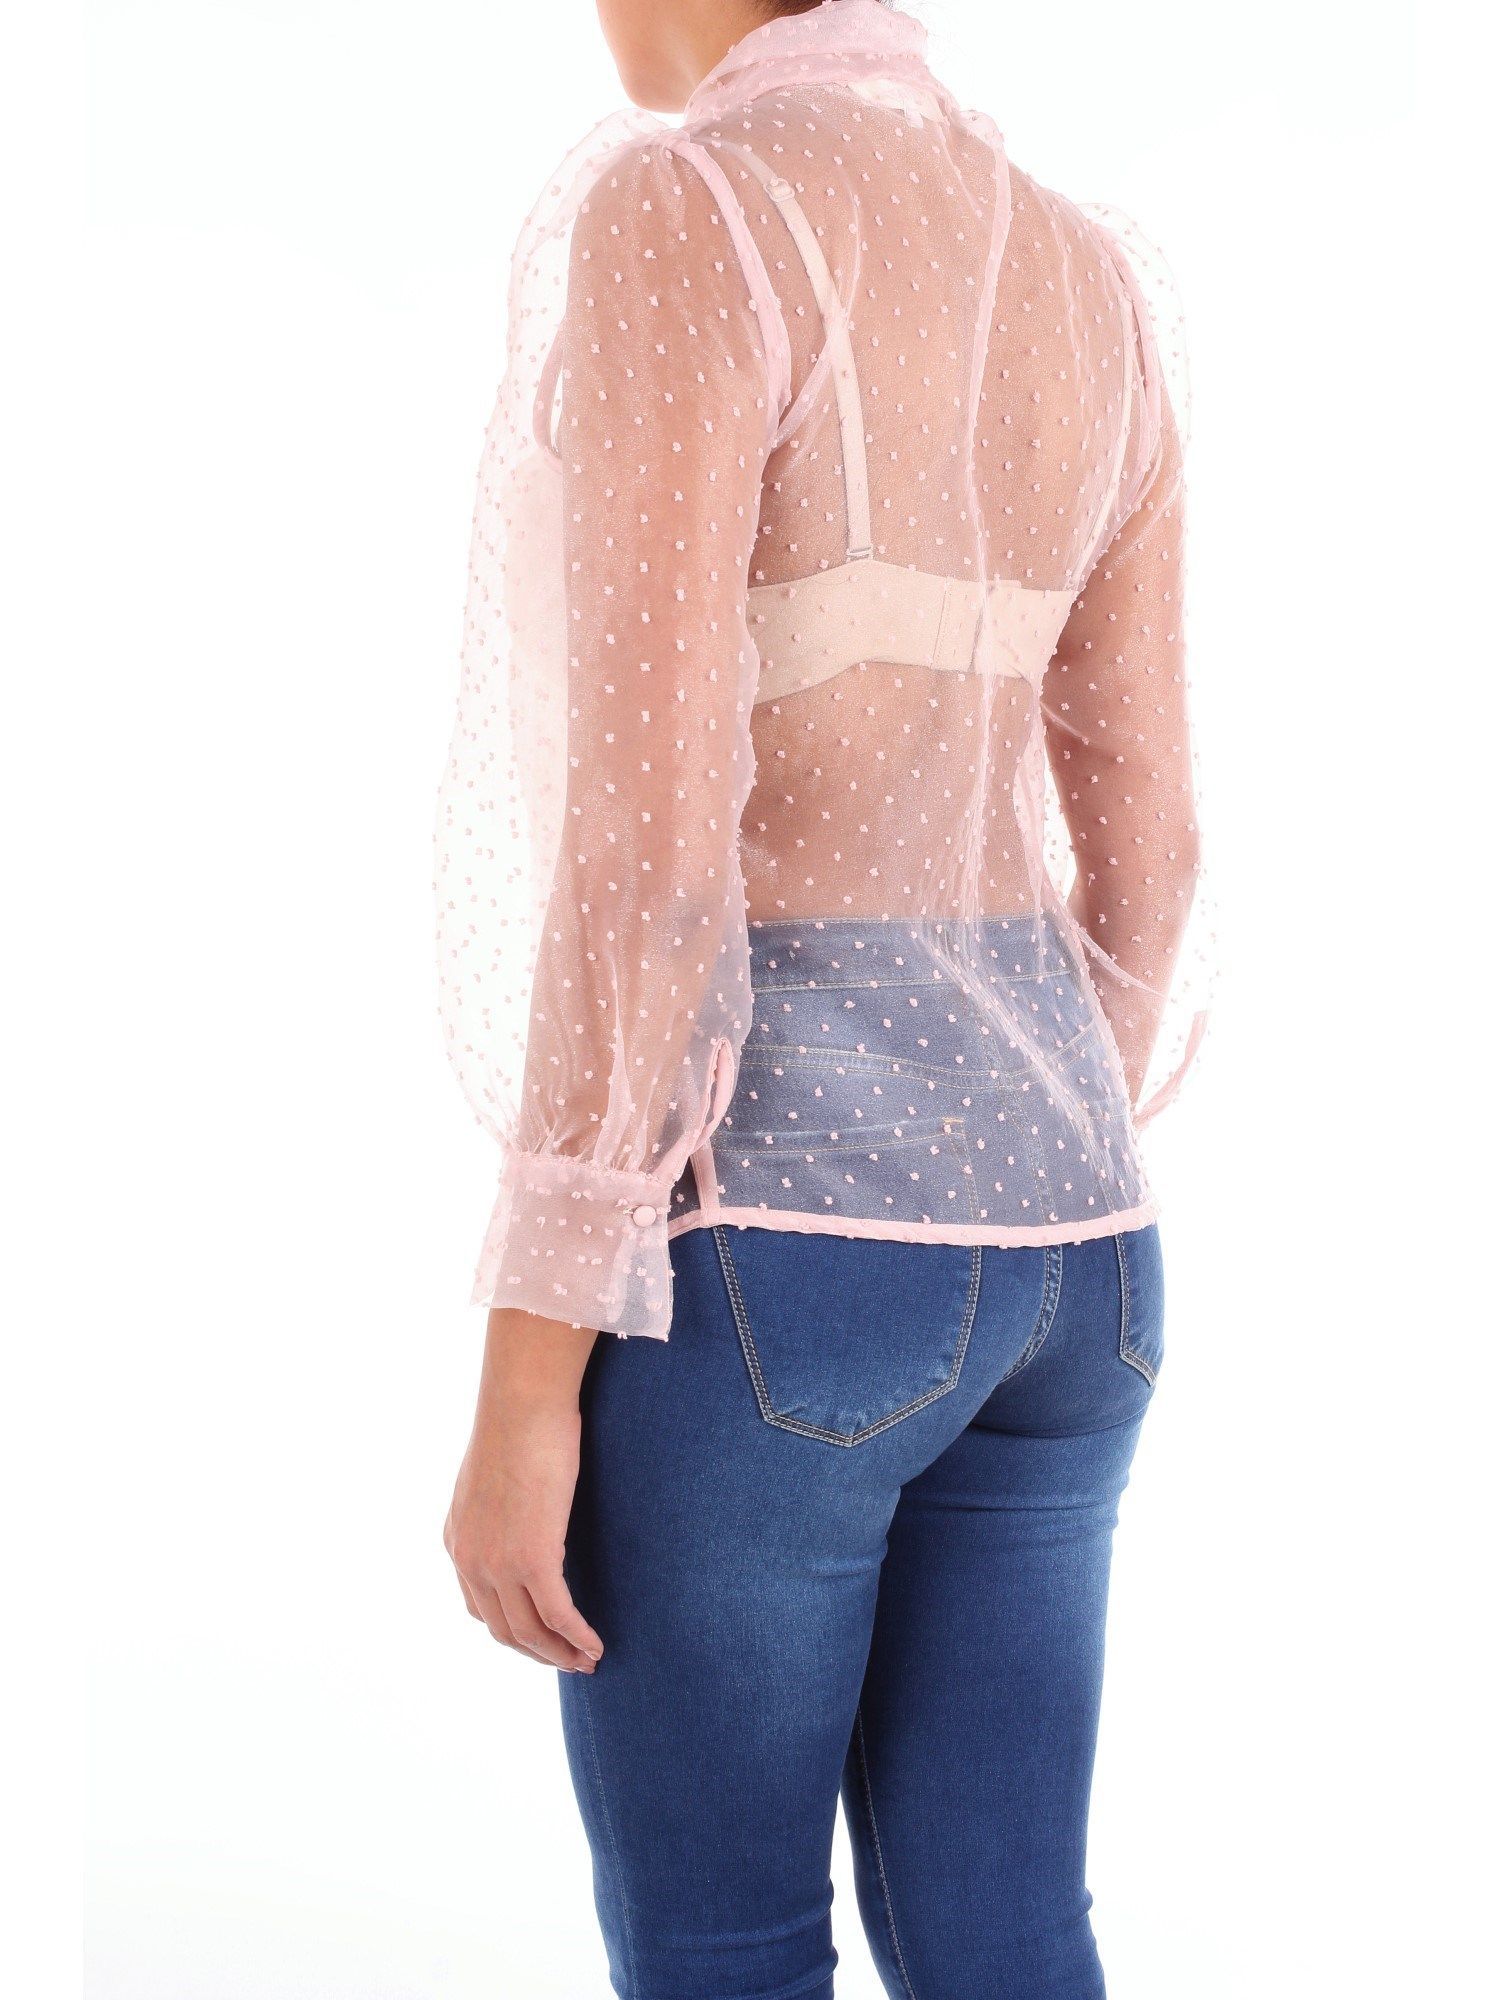 JUMPER KONTATTO, POLYESTER 100%, color PINK, Outlet, product code B3109ROSA